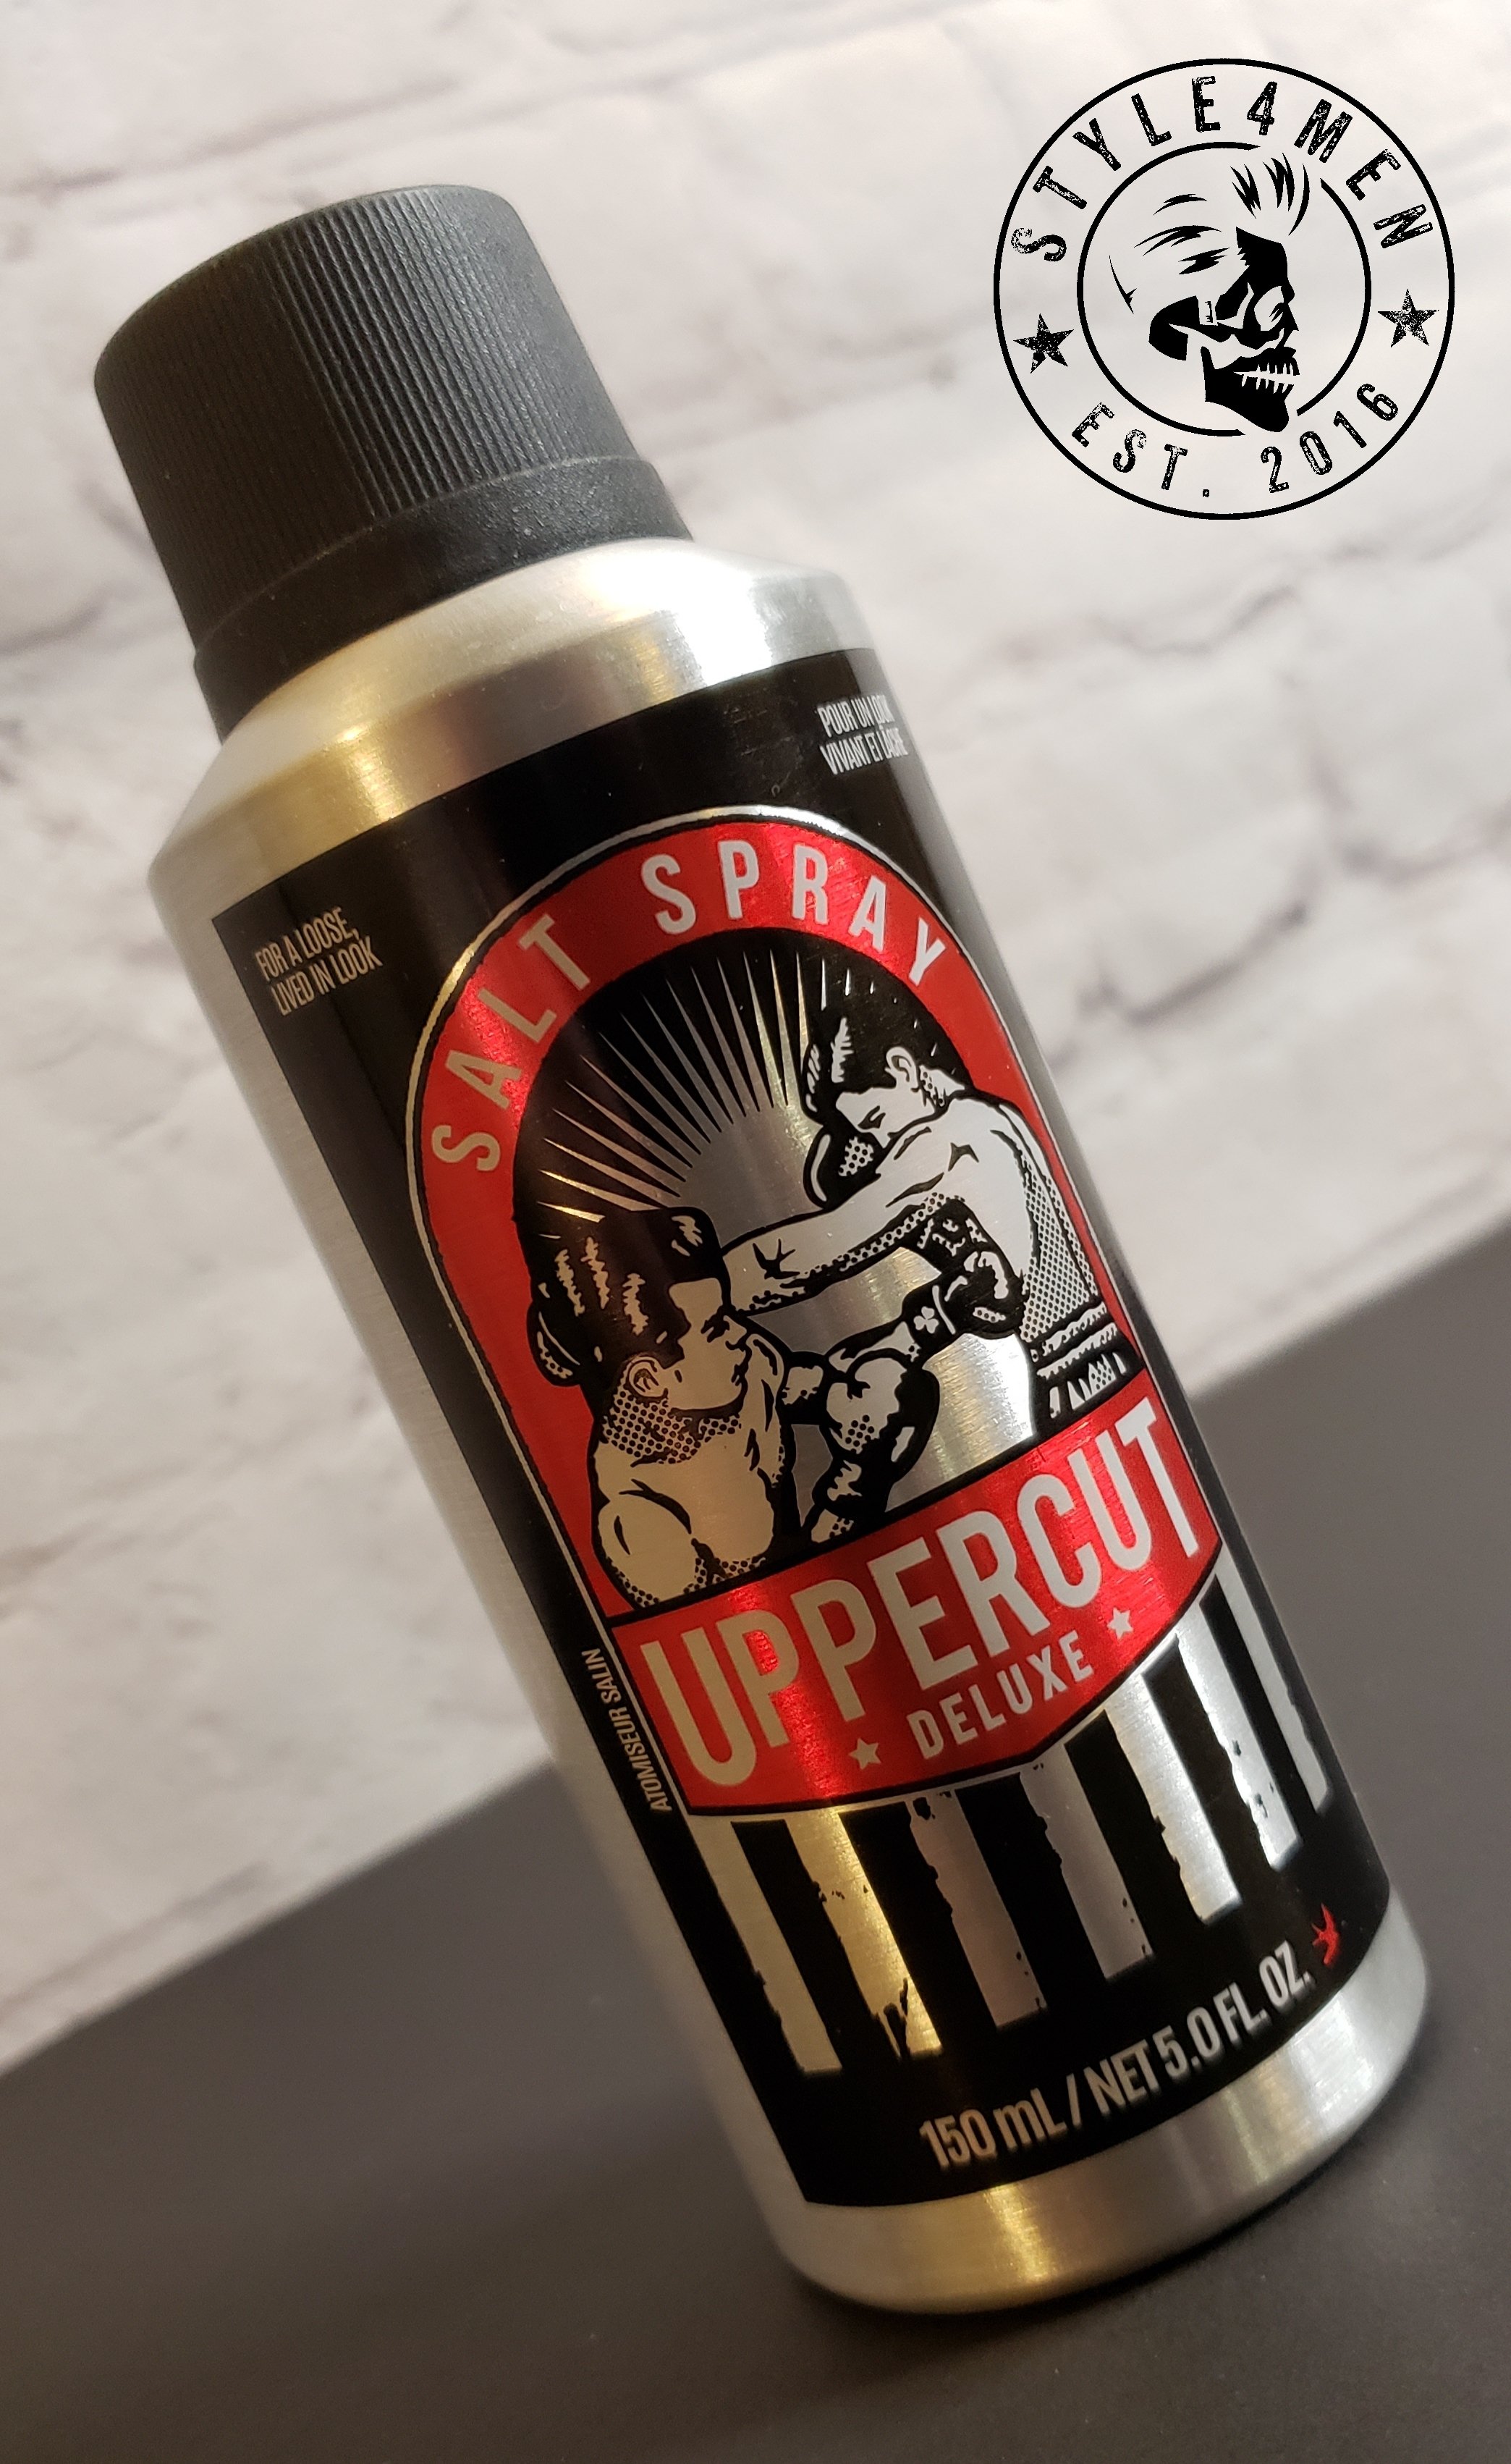 UPPERCUT DELUXE is back with a new salt spray